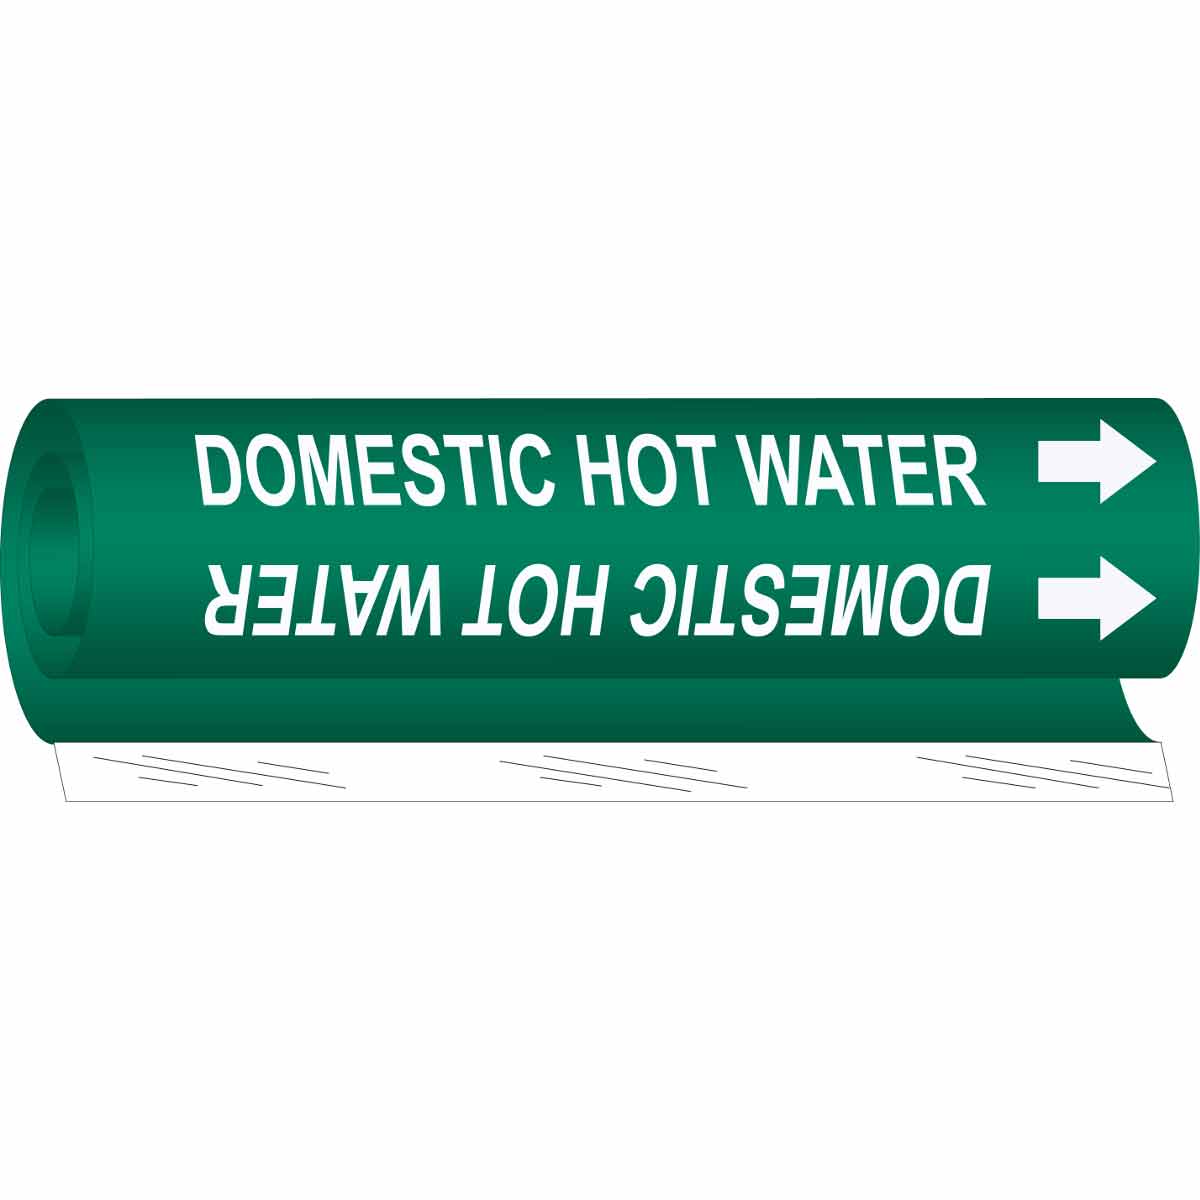 DOMESTIC HOT WATER WHITE / GREEN